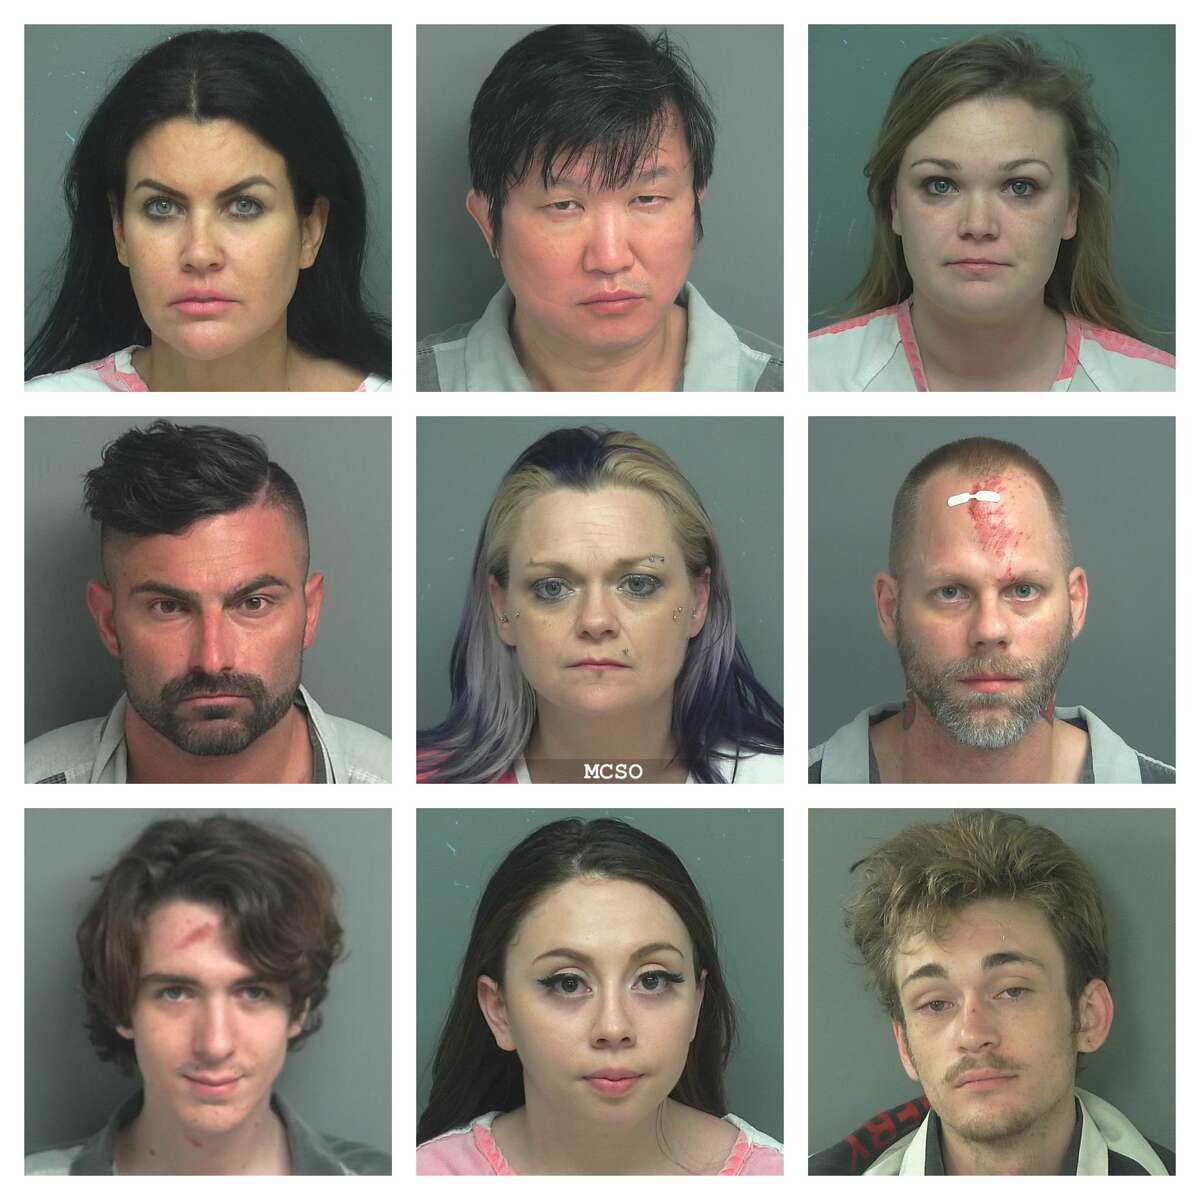 PHOTOS: Spring break DWI arrestsNearly 130 people were arrested for Driving While Intoxicated charges in Montgomery County over the course of spring break.>>>See mugshots and charges of the accused...